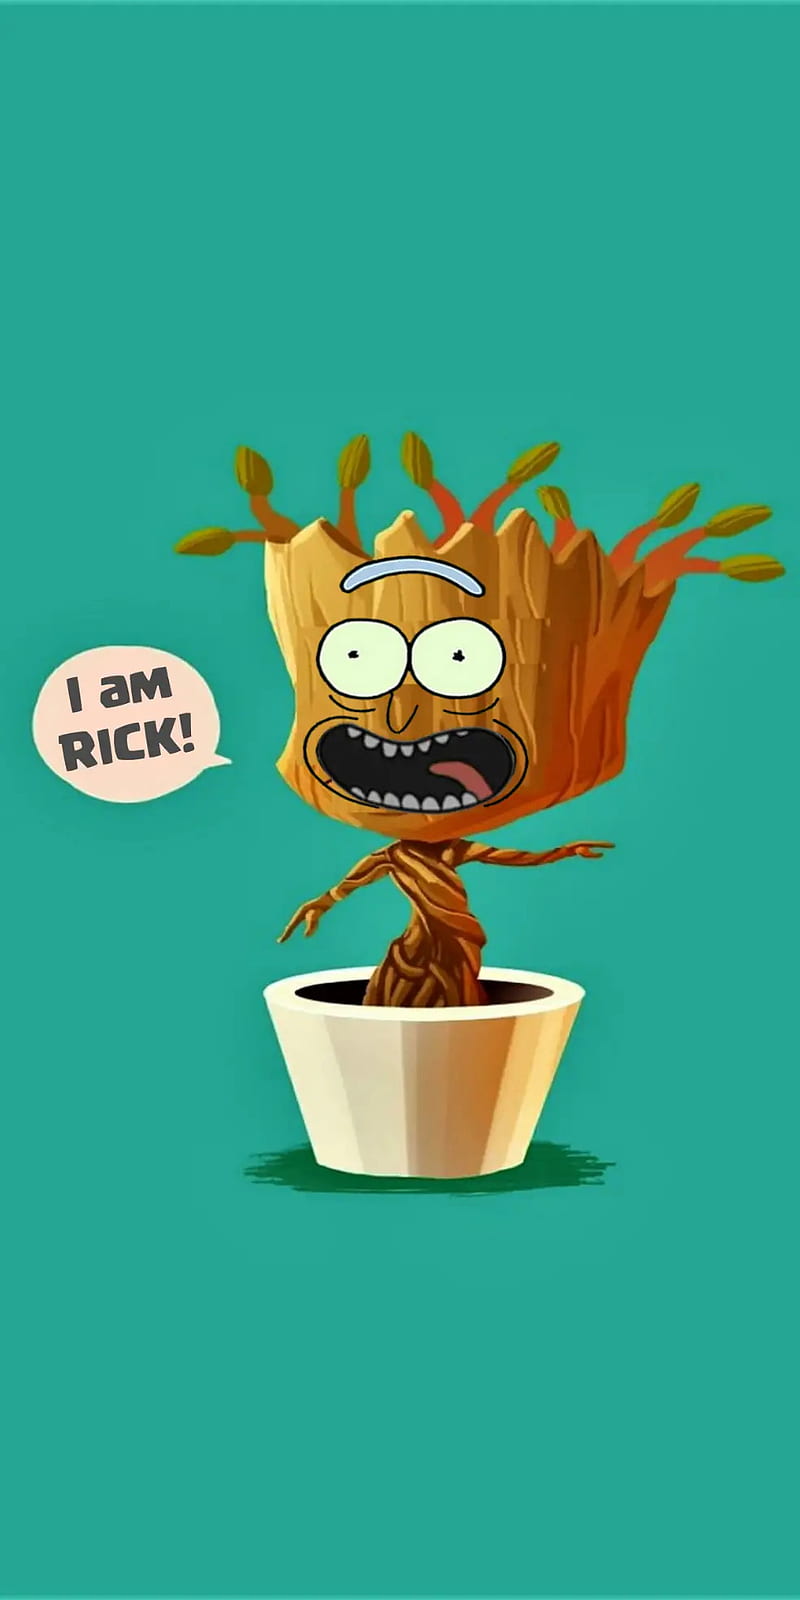 Rick Sanchez Groot, adultswim, funny, morty, morty smith, picklerick, rick and morty edit, rick and morty fandom, rick sanchez, rickandmorty, wubbalubbadubdub, HD phone wallpaper